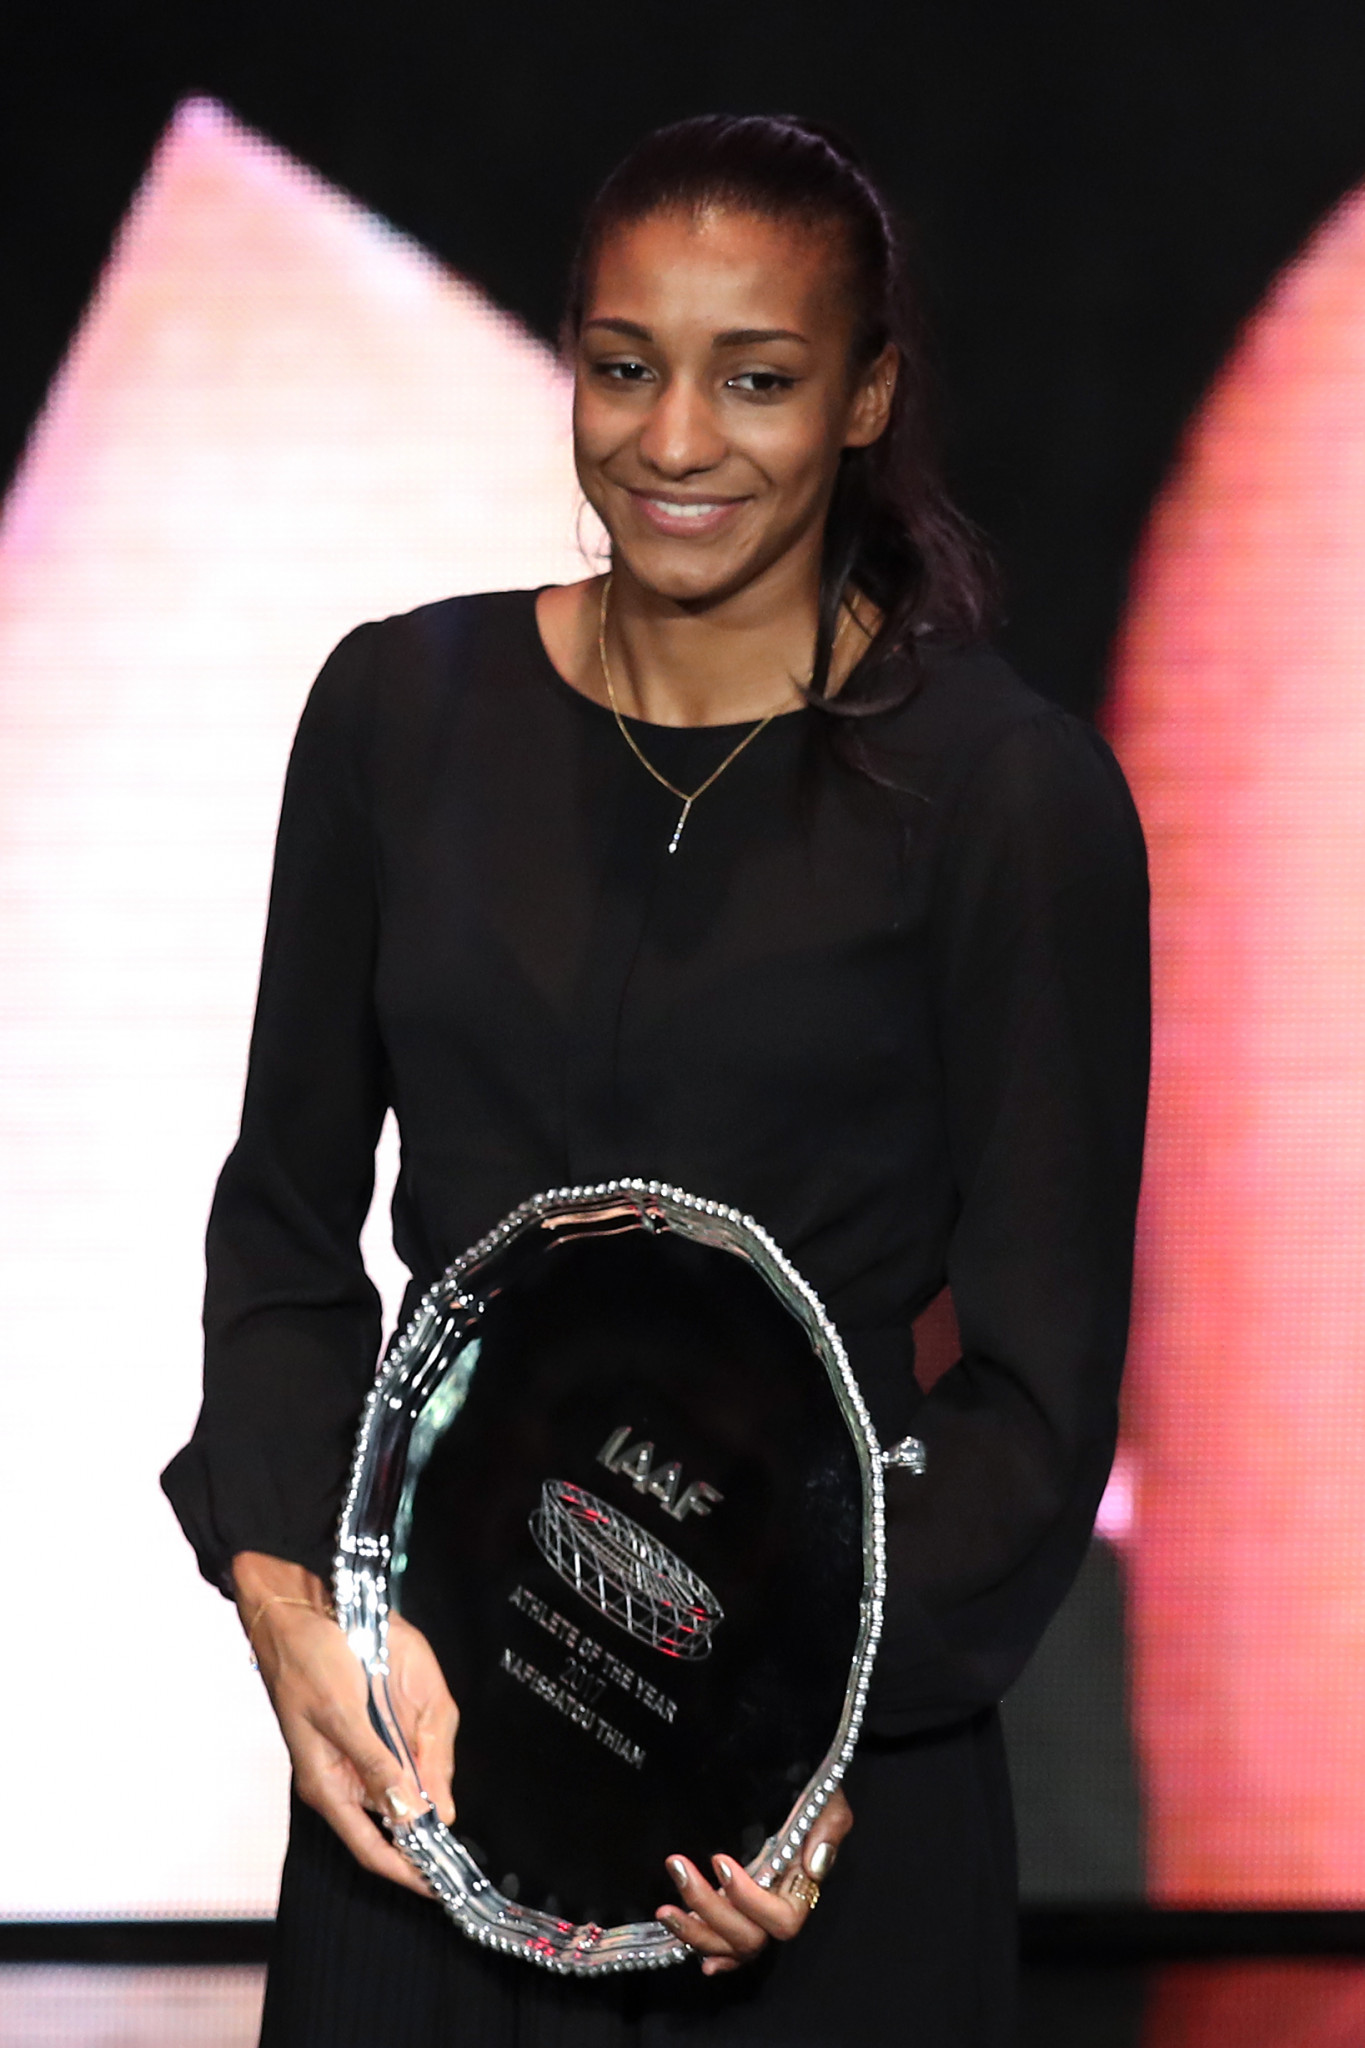 Belgium's Olympic and world heptathlon champion Nafi Thiam was named IAAF Female Athlete of the Year ©Getty Images